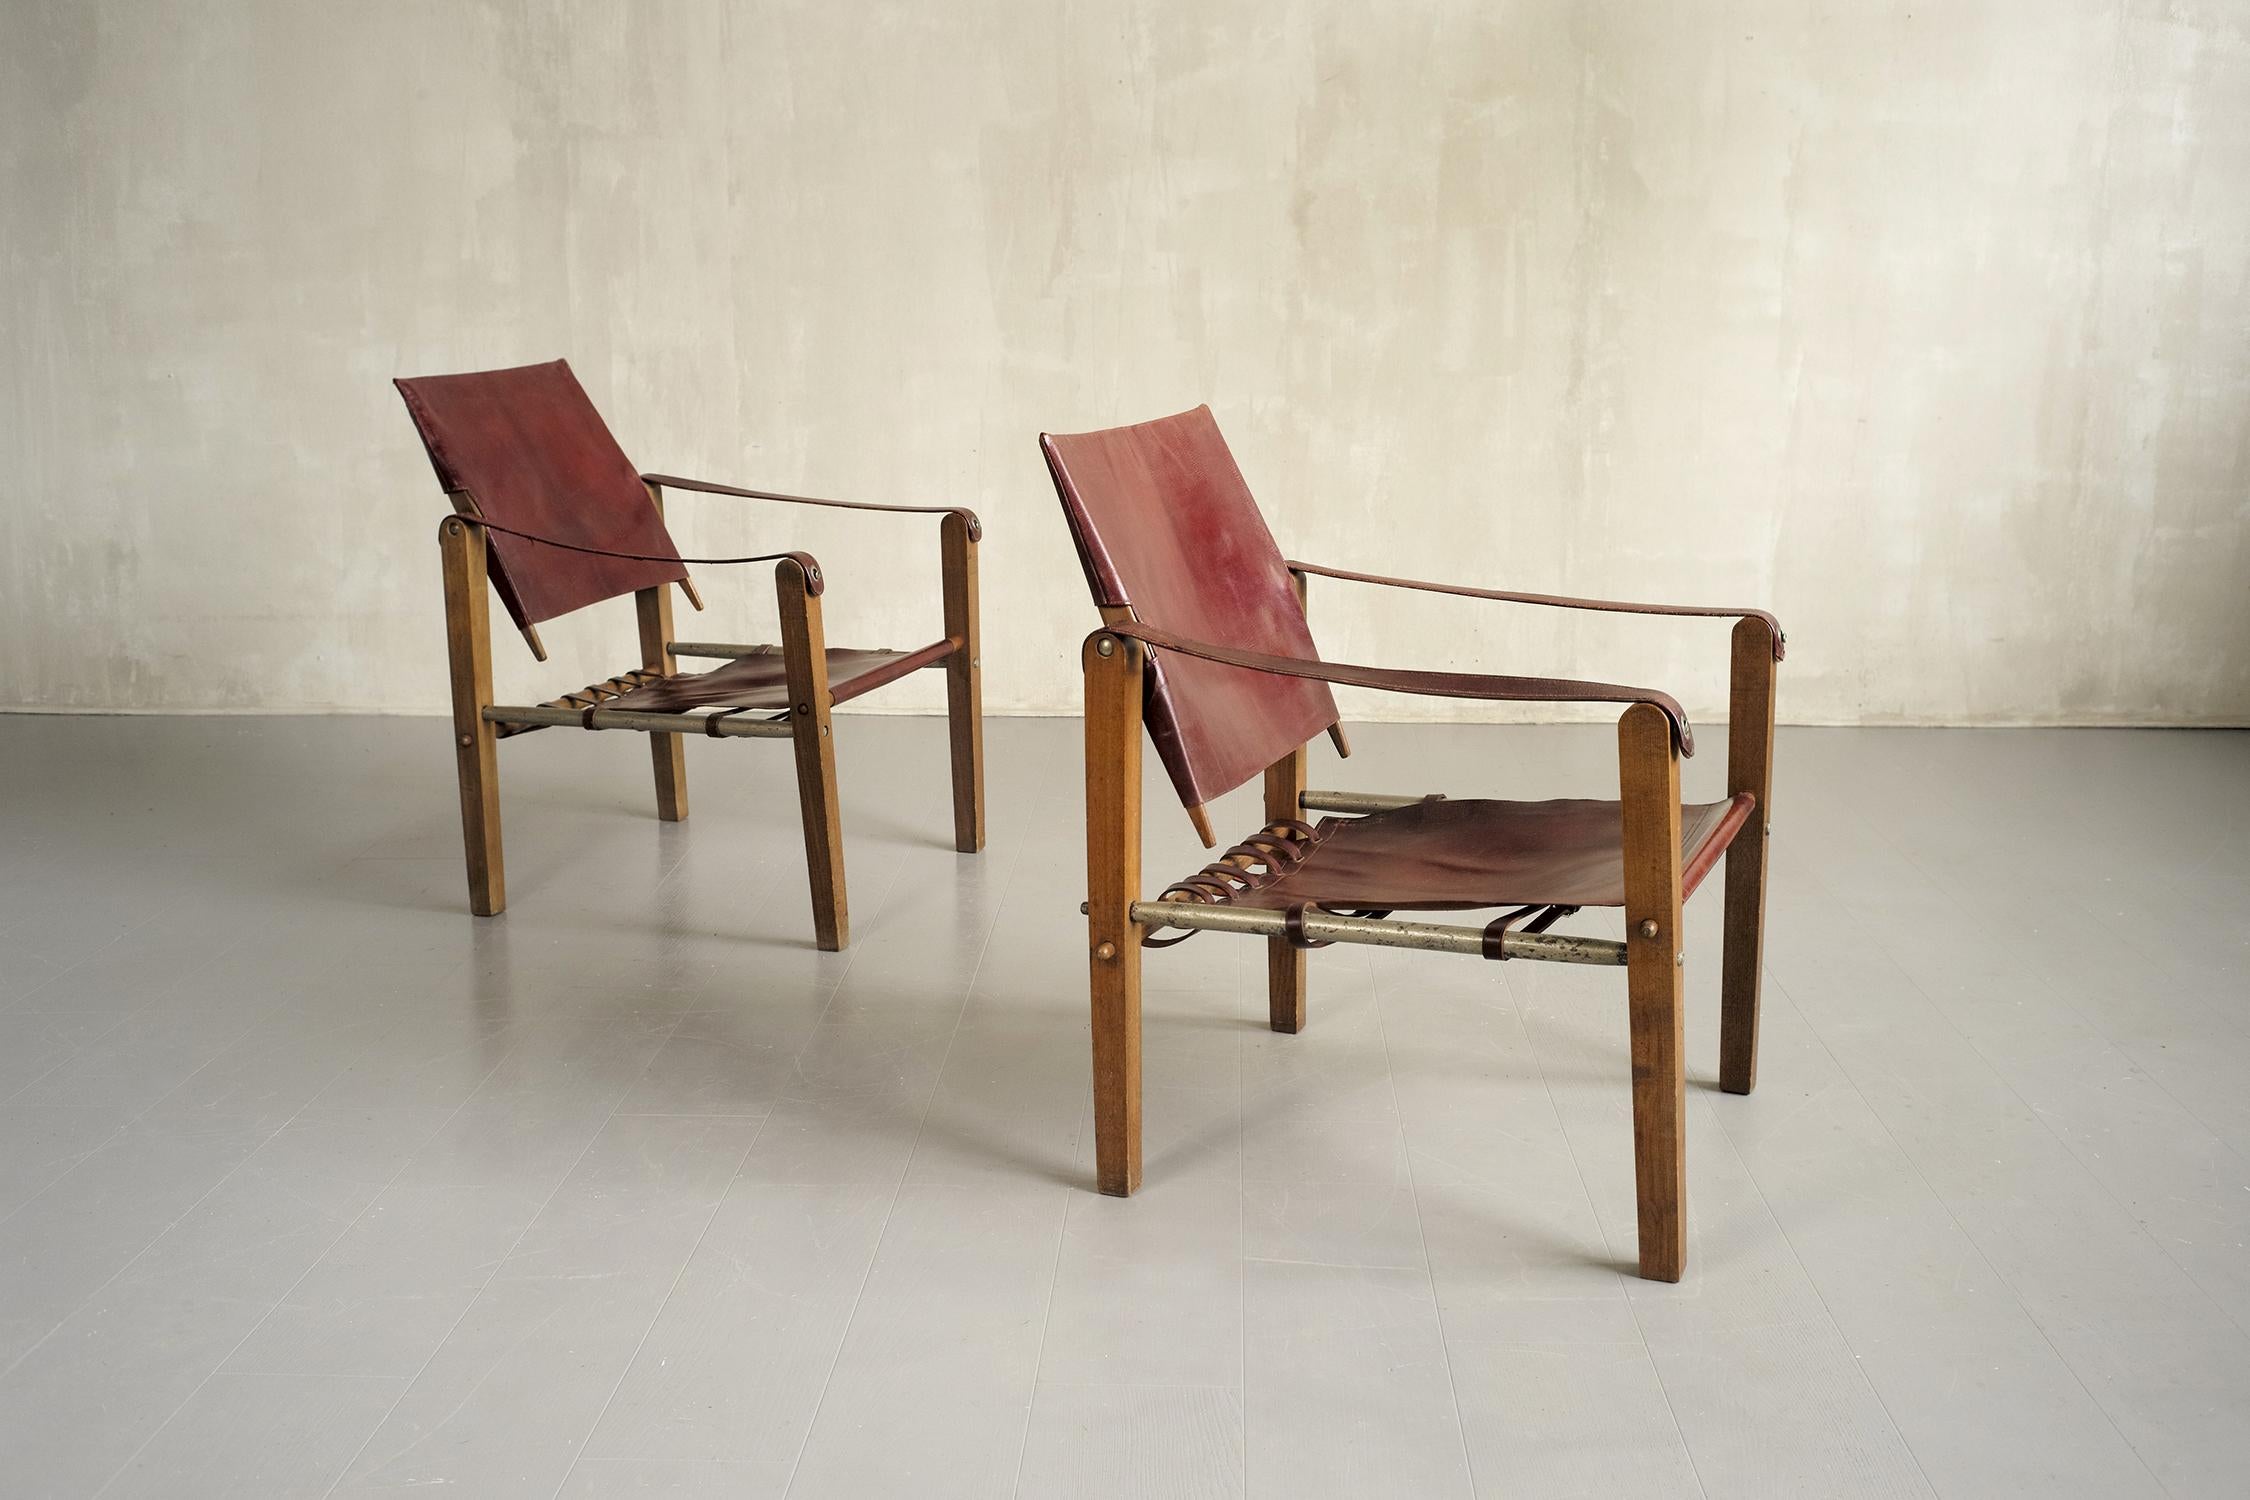 Exceptional set of 4 'Demountable' armchairs produced by Sellerie Bouix, Tunis 1920.
In this 